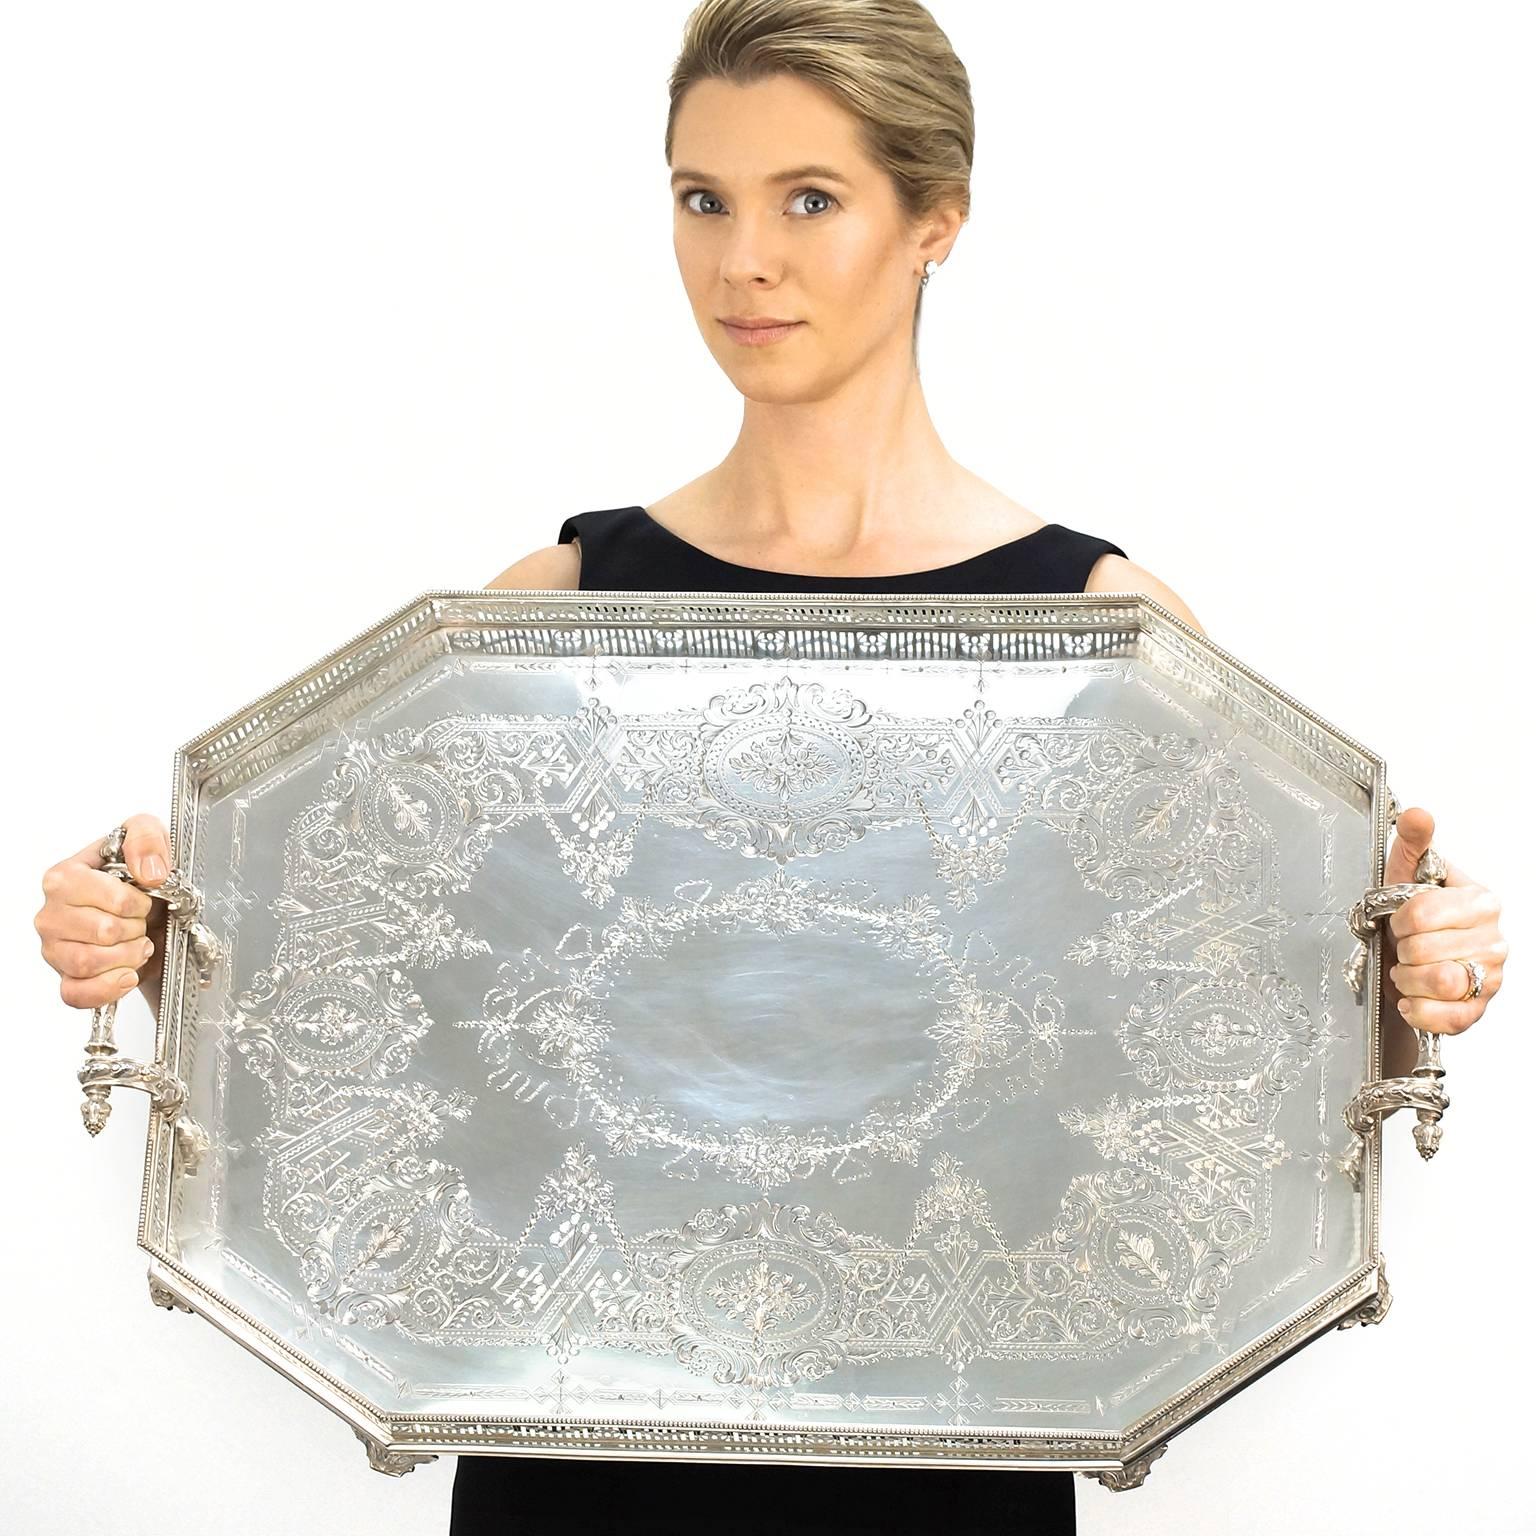 Circa 1896, Sterling, by Martin and Hall of Sheffield, England.  This tray is an absolutely brilliant example of late Victorian British sterling. It has it all - classic good looks, massive size and weight, octagonal form, superb engraving, solid